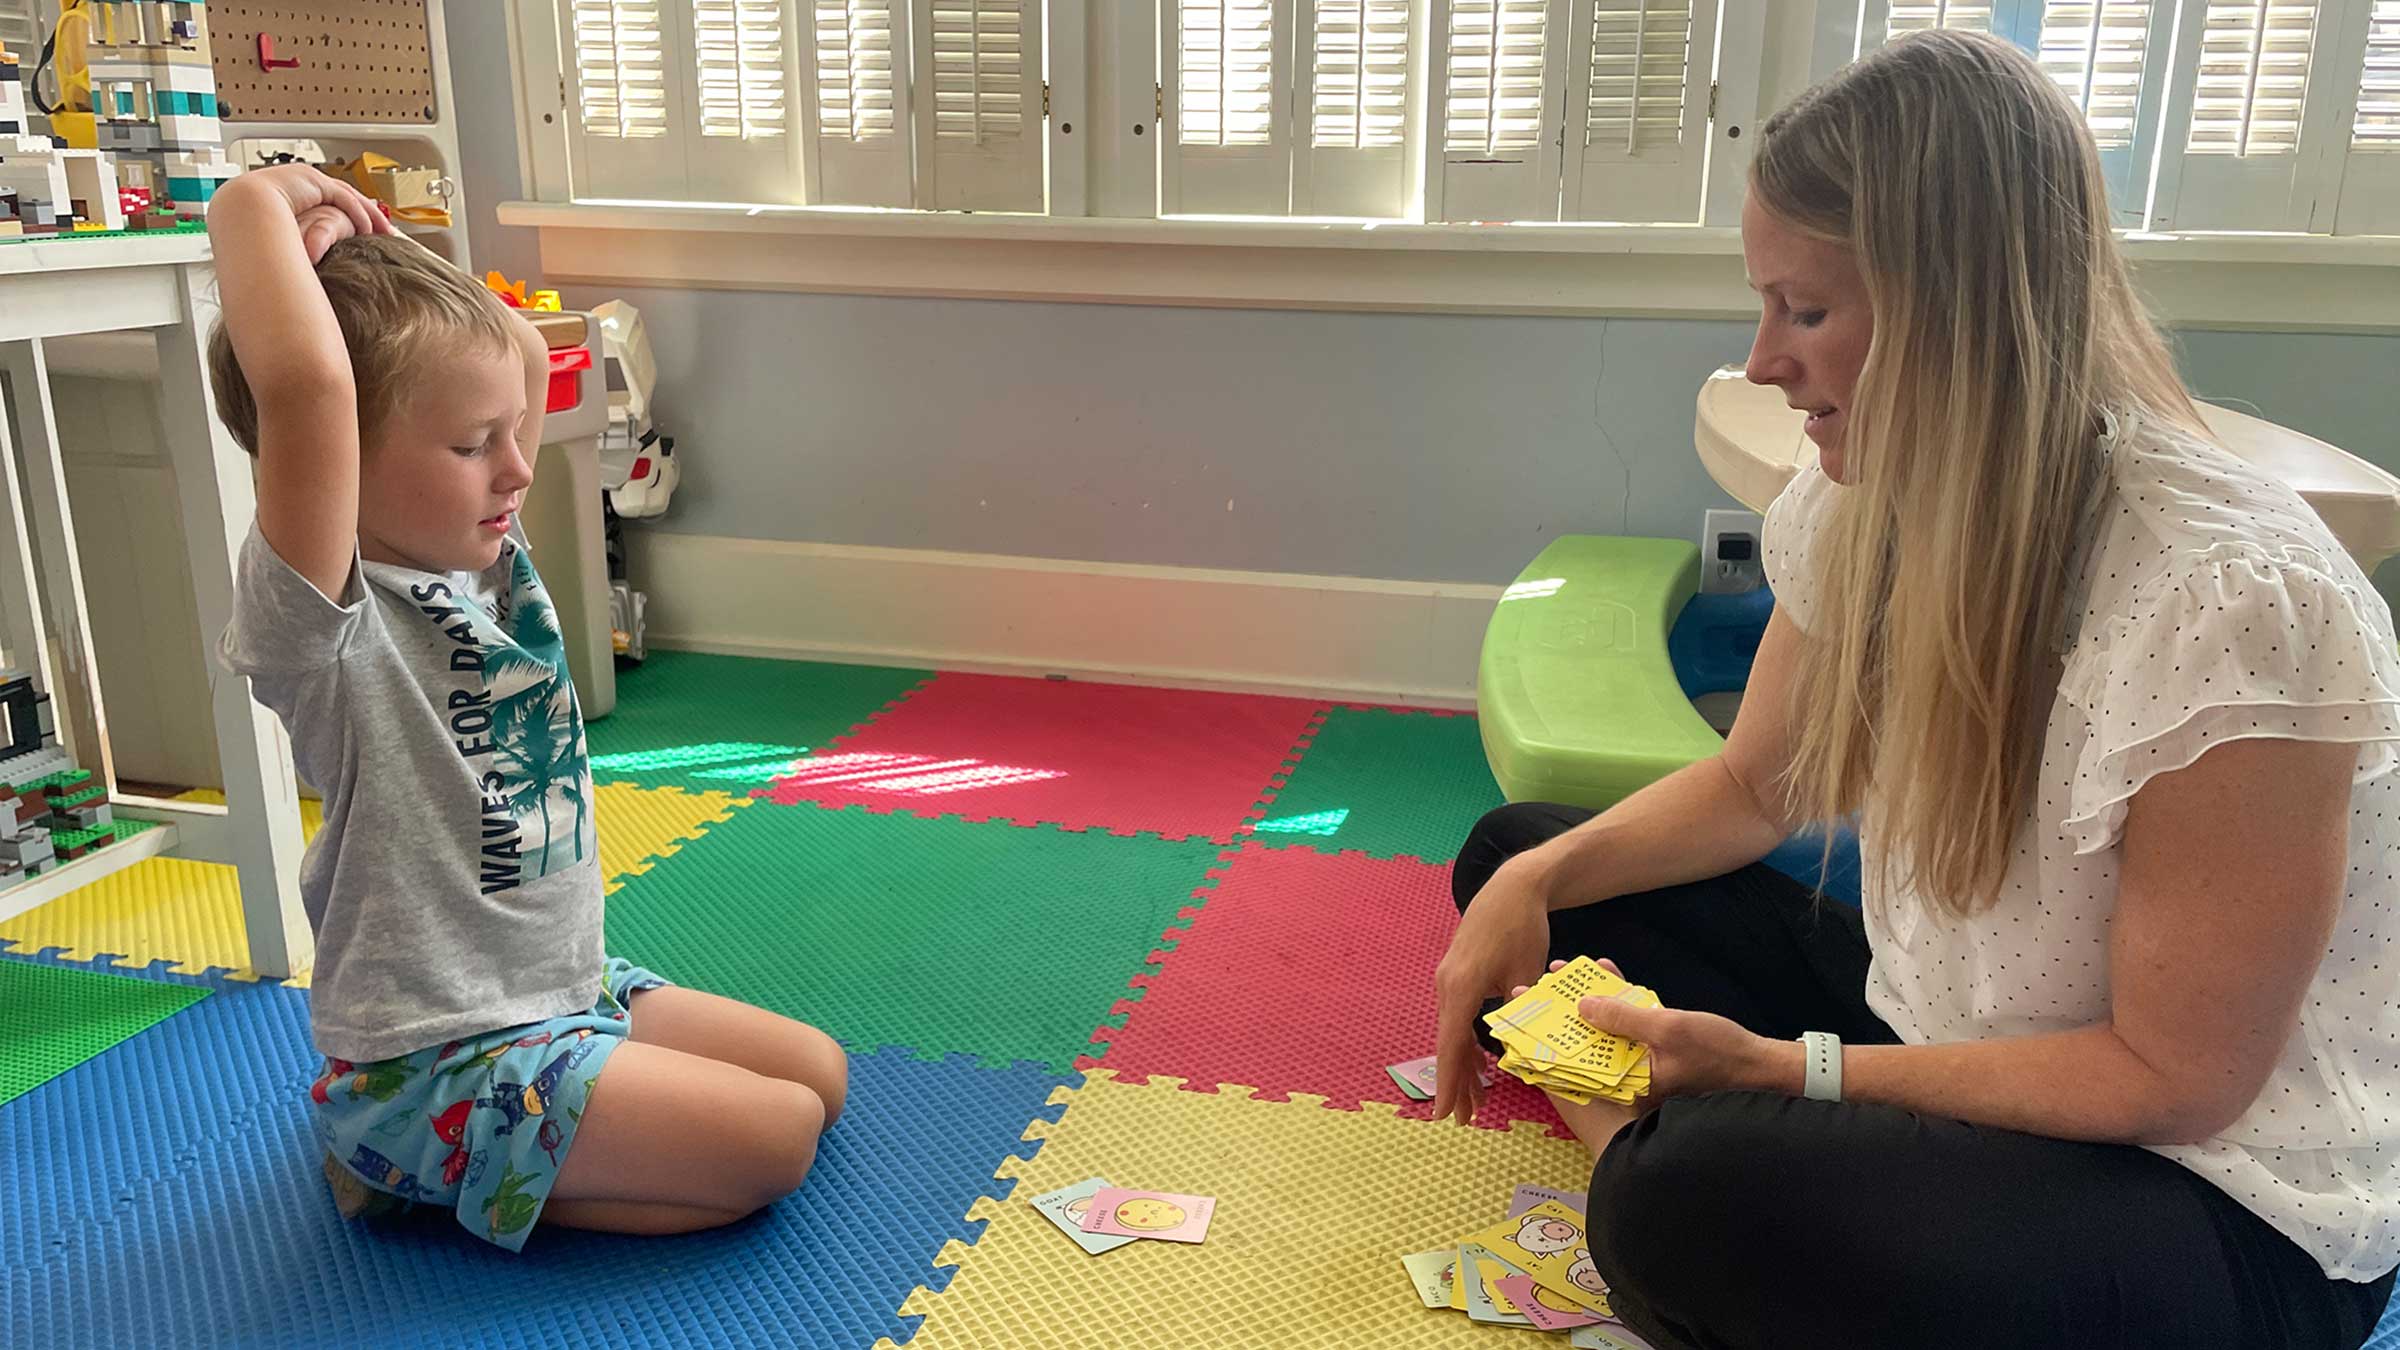 Kate Gawlik, DNP, plays a card game with her young son